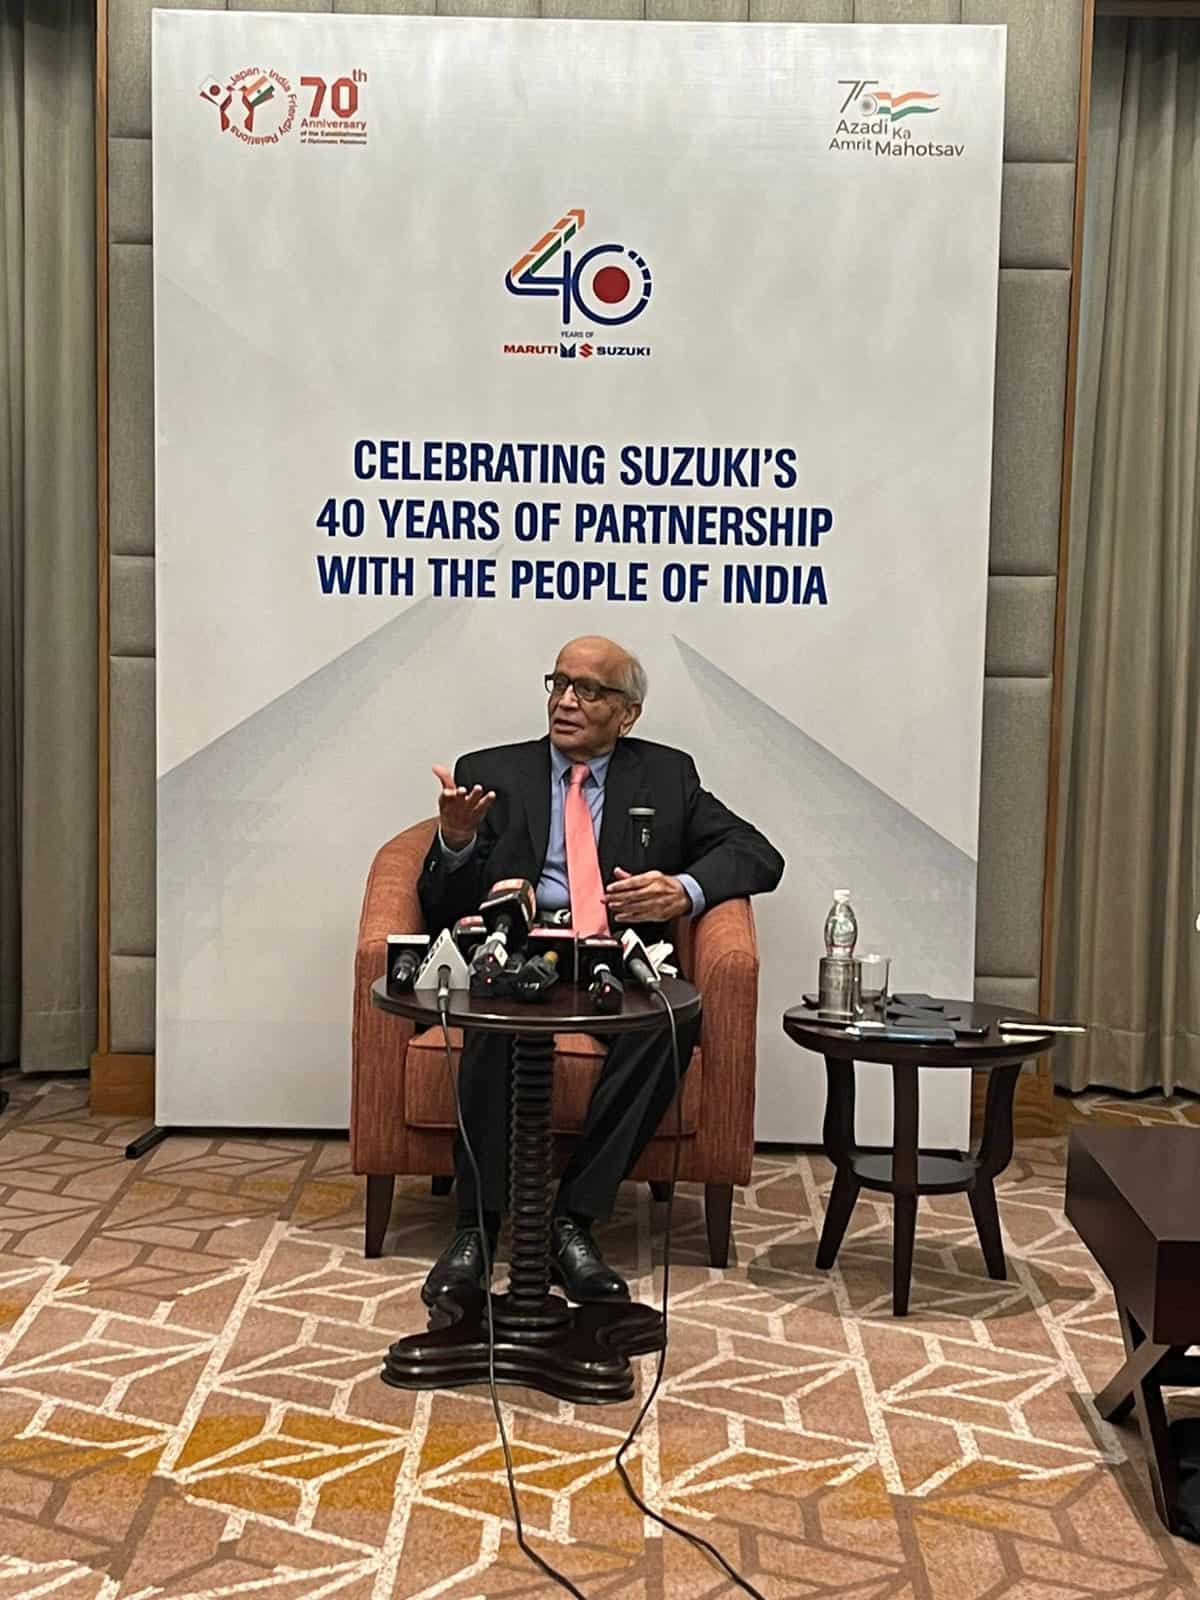 Maruti Suzuki Chairman RC Bhargava says trust on private sector is way forward for India's growth